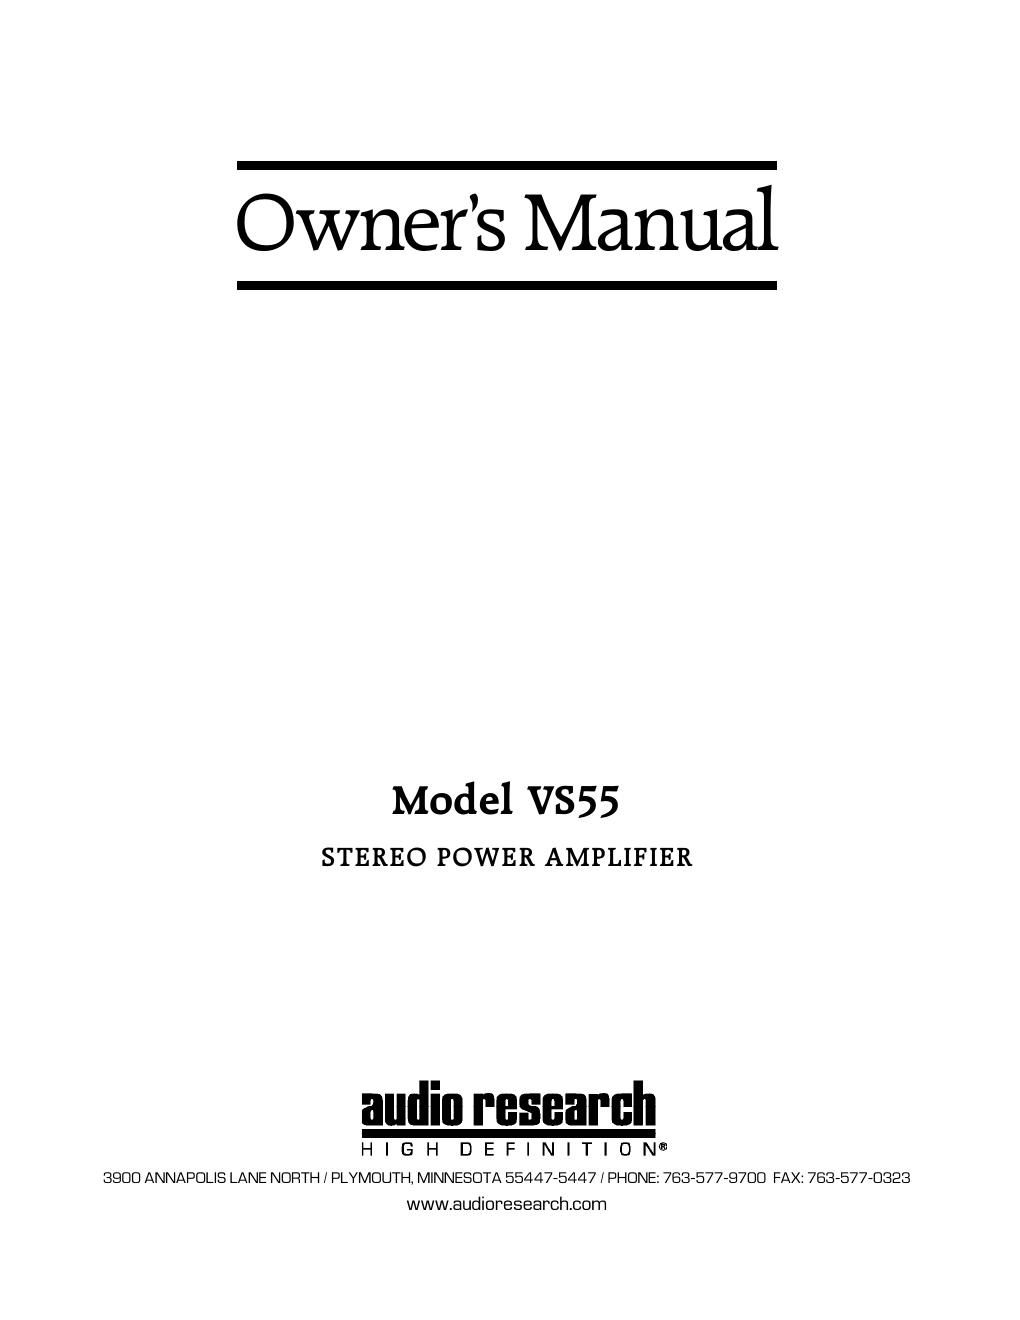 audio research vs 55 owners manual